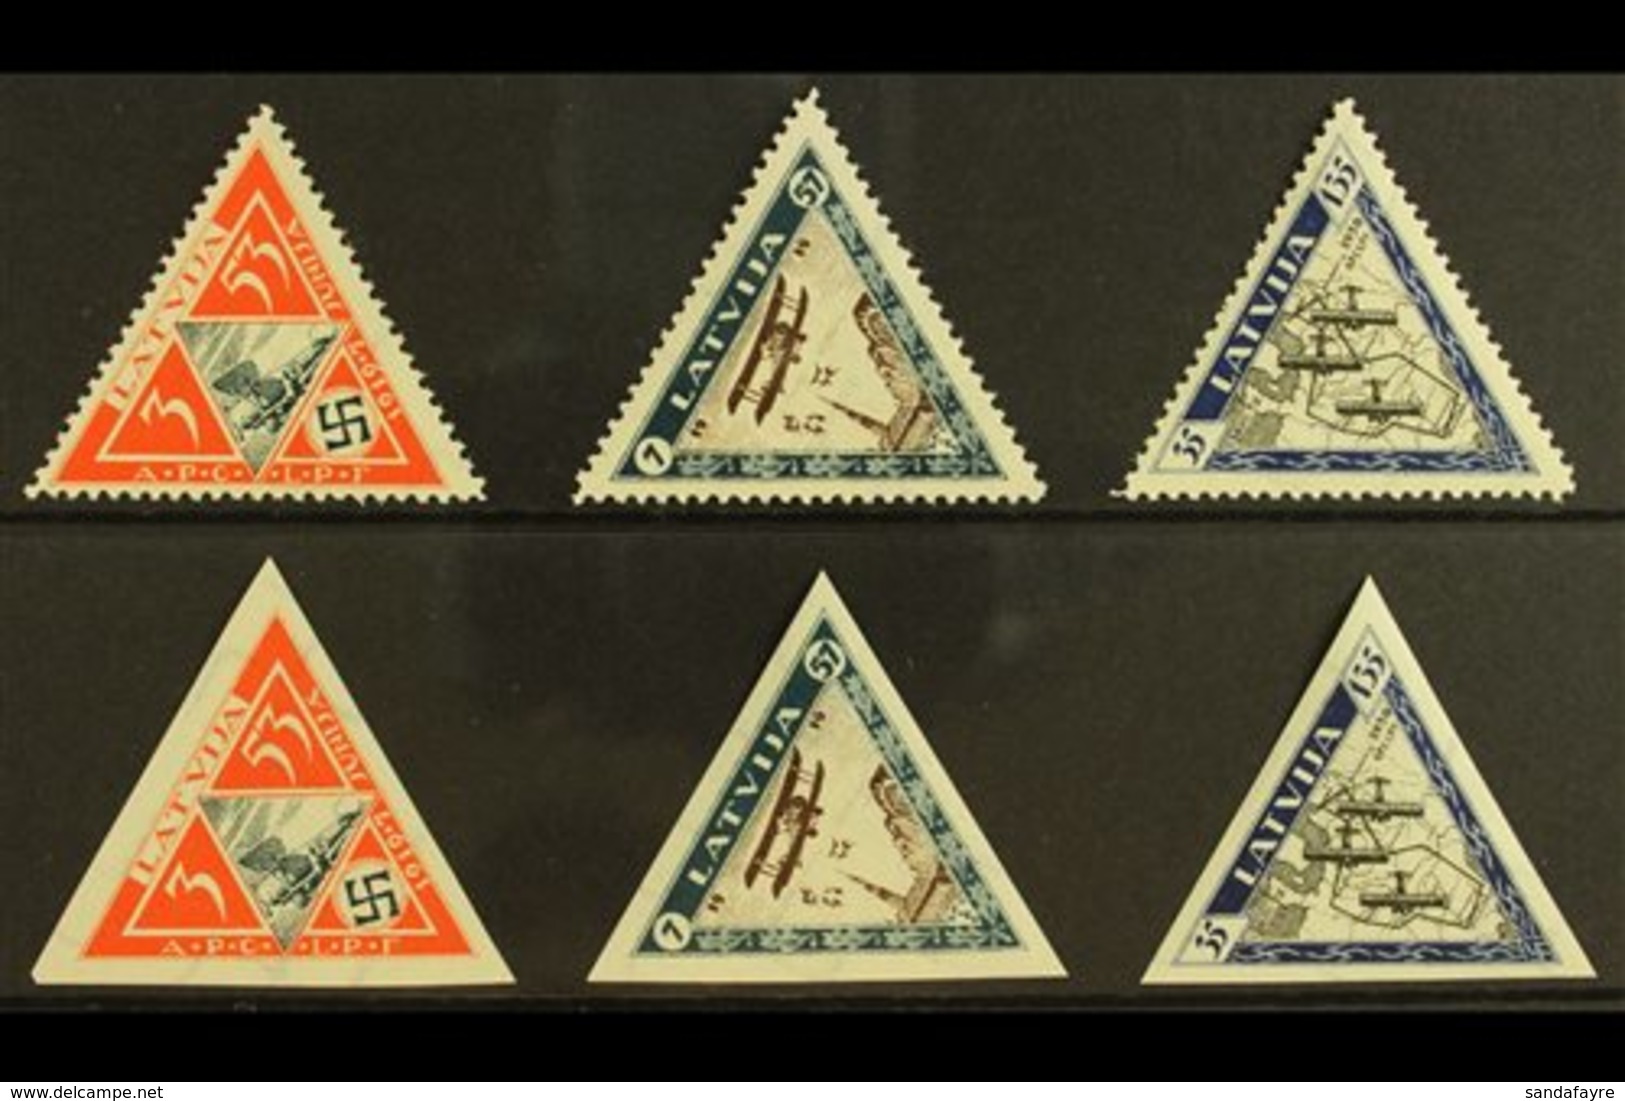 1933  Wounded Airmen Triangular Perforated & Imperforate Sets, Mi 225A/227A & 225B/227B, SG 240A/42A & 240B/42B, Fine Mi - Latvia